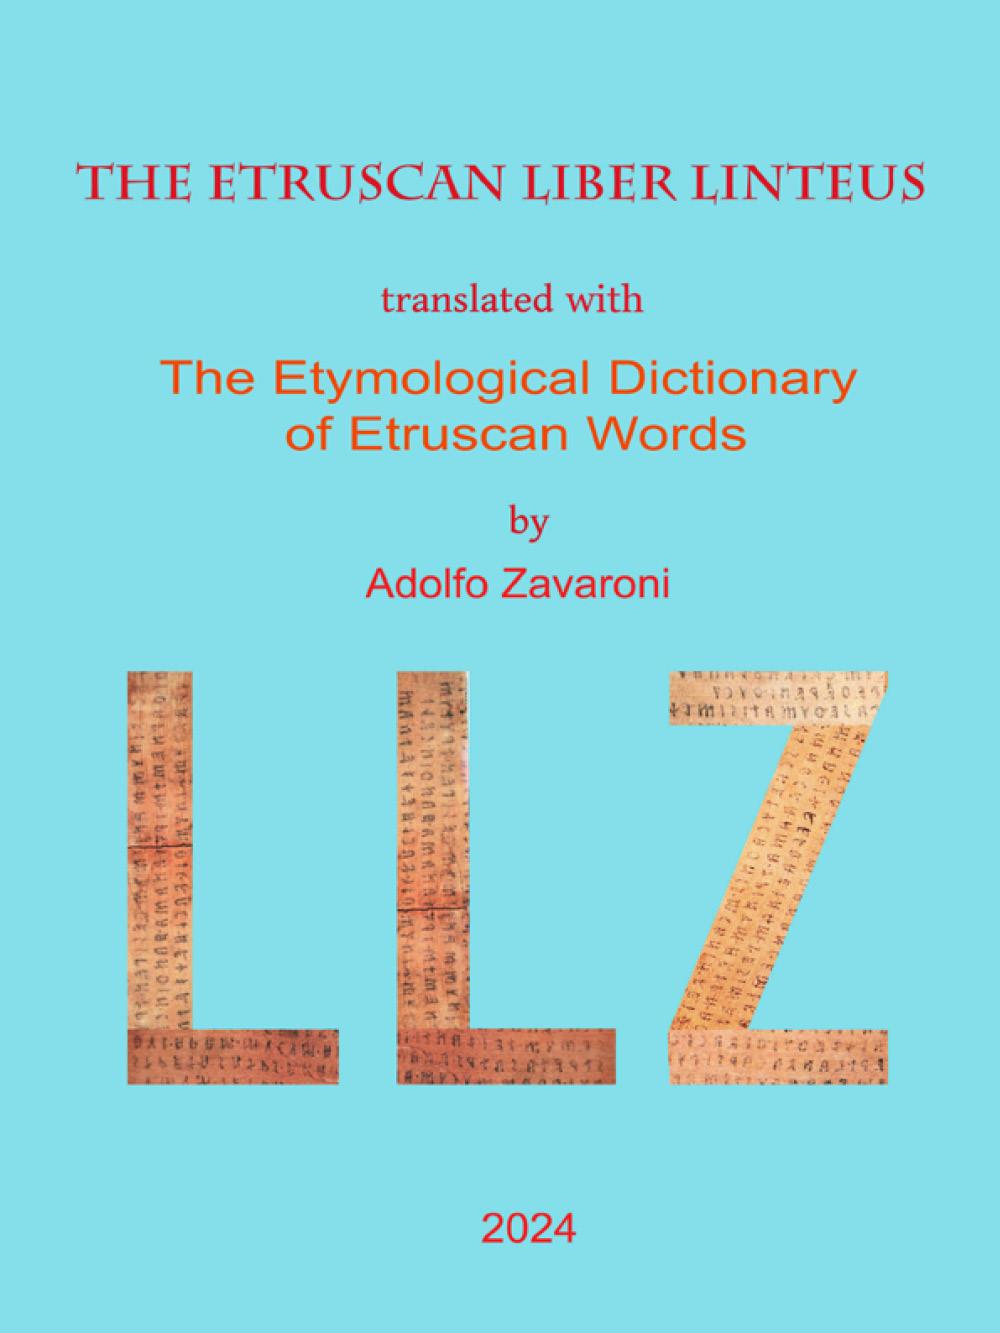 The Etruscan Liber Linteus translated with the Etymological Dictionary of Etruscan Words